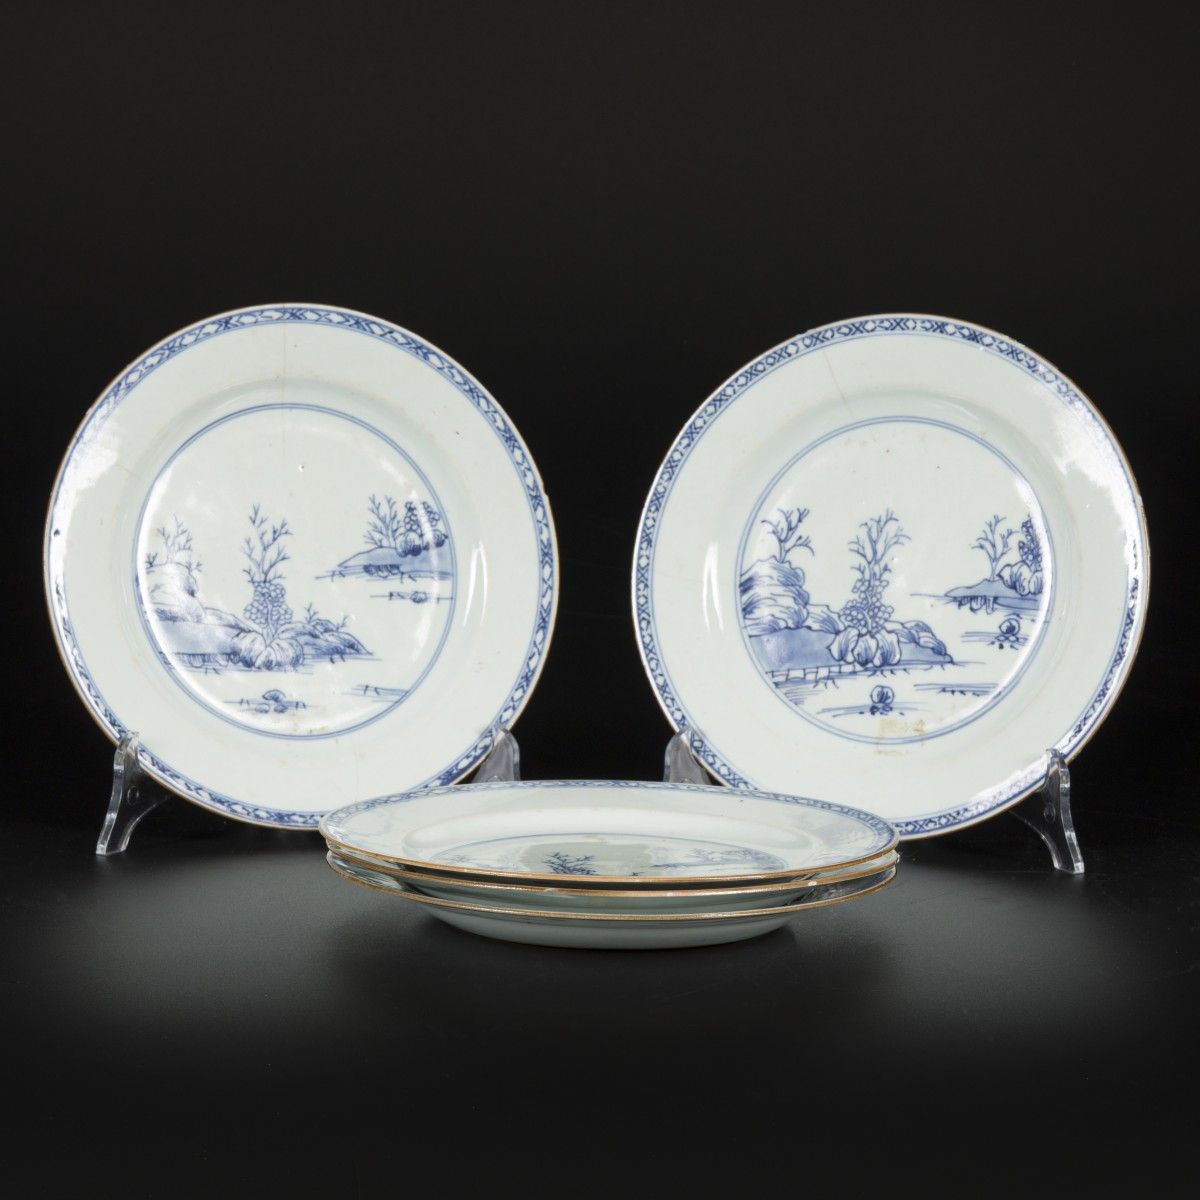 A set of (5) porcelain plates with a landscape scene, China, Qianglong. Diámetro&hellip;